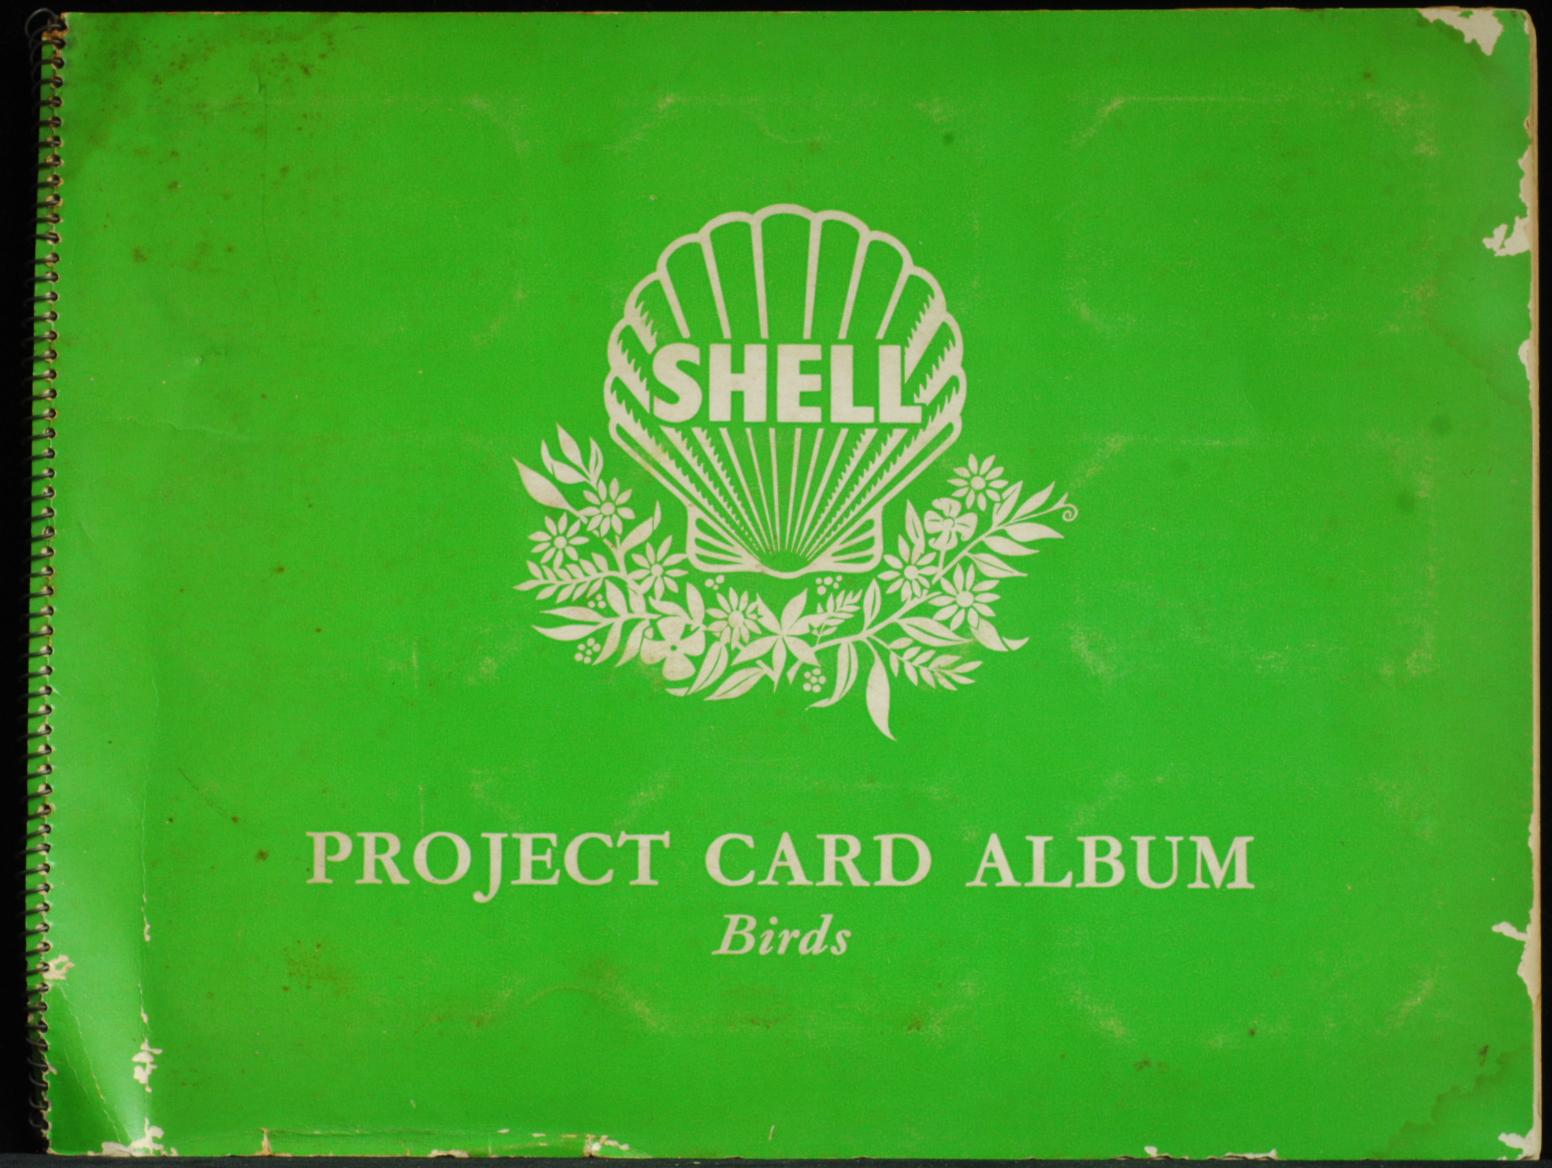 mbb004786b_-_Unnamed_-_Shell_Project_Card_Album_Birds_-_Contains_Illustrations.jpg